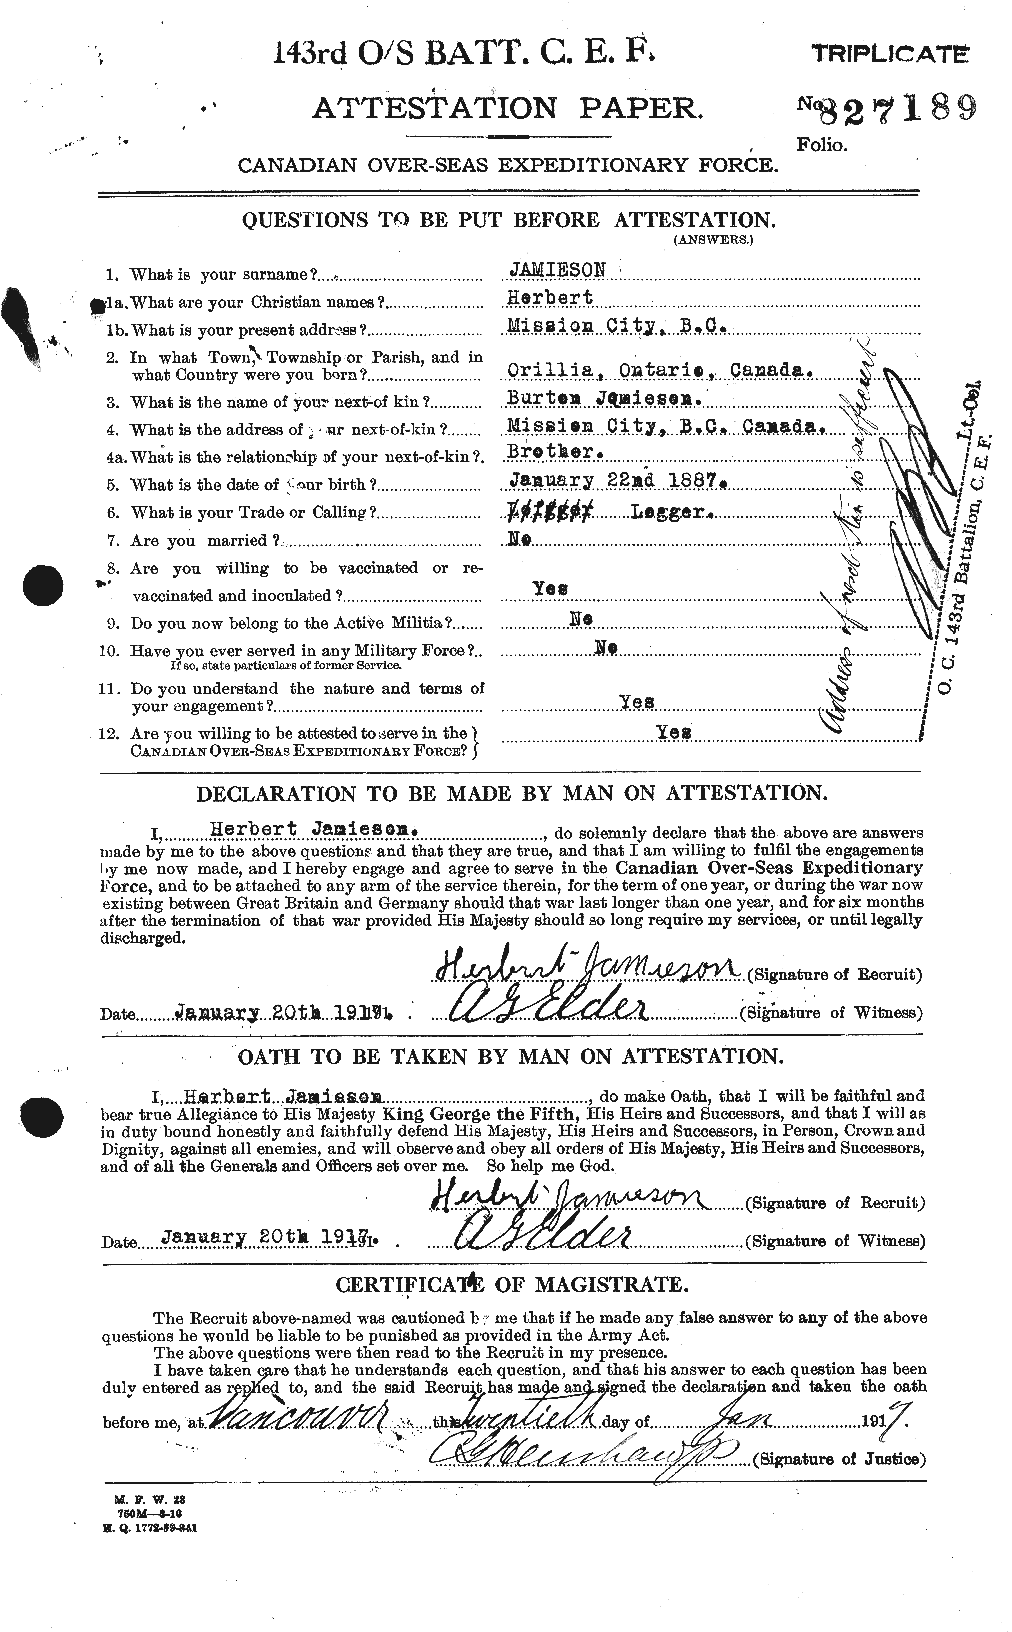 Personnel Records of the First World War - CEF 415173a